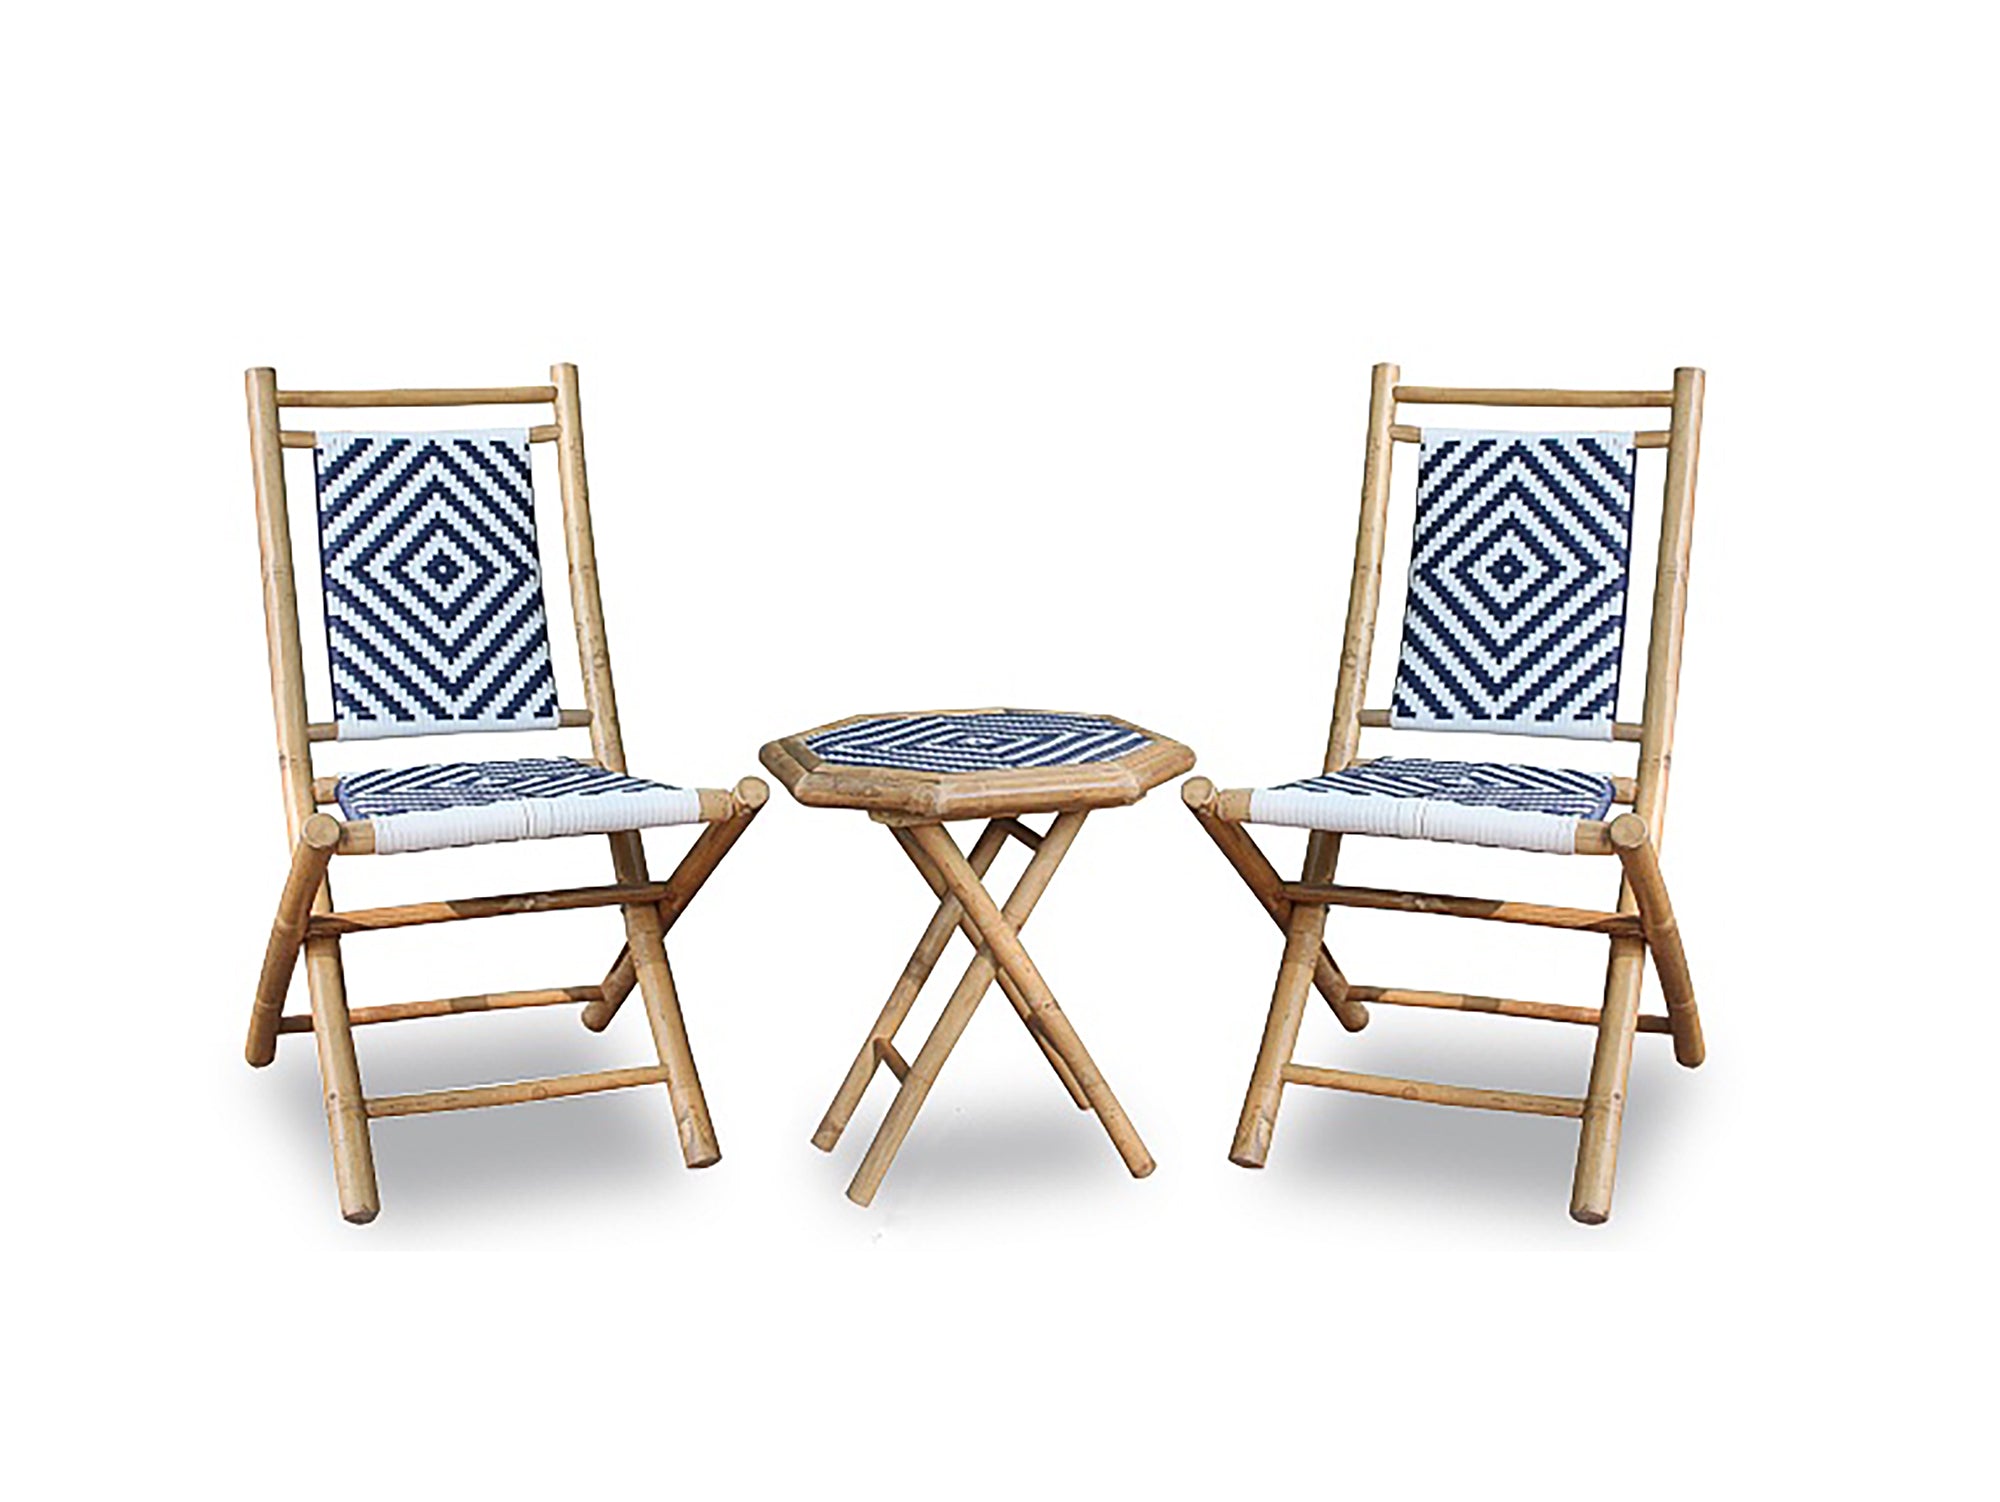 21" Navy Blue and White Outdoor Conversation Set of 2 Chairs and a Table